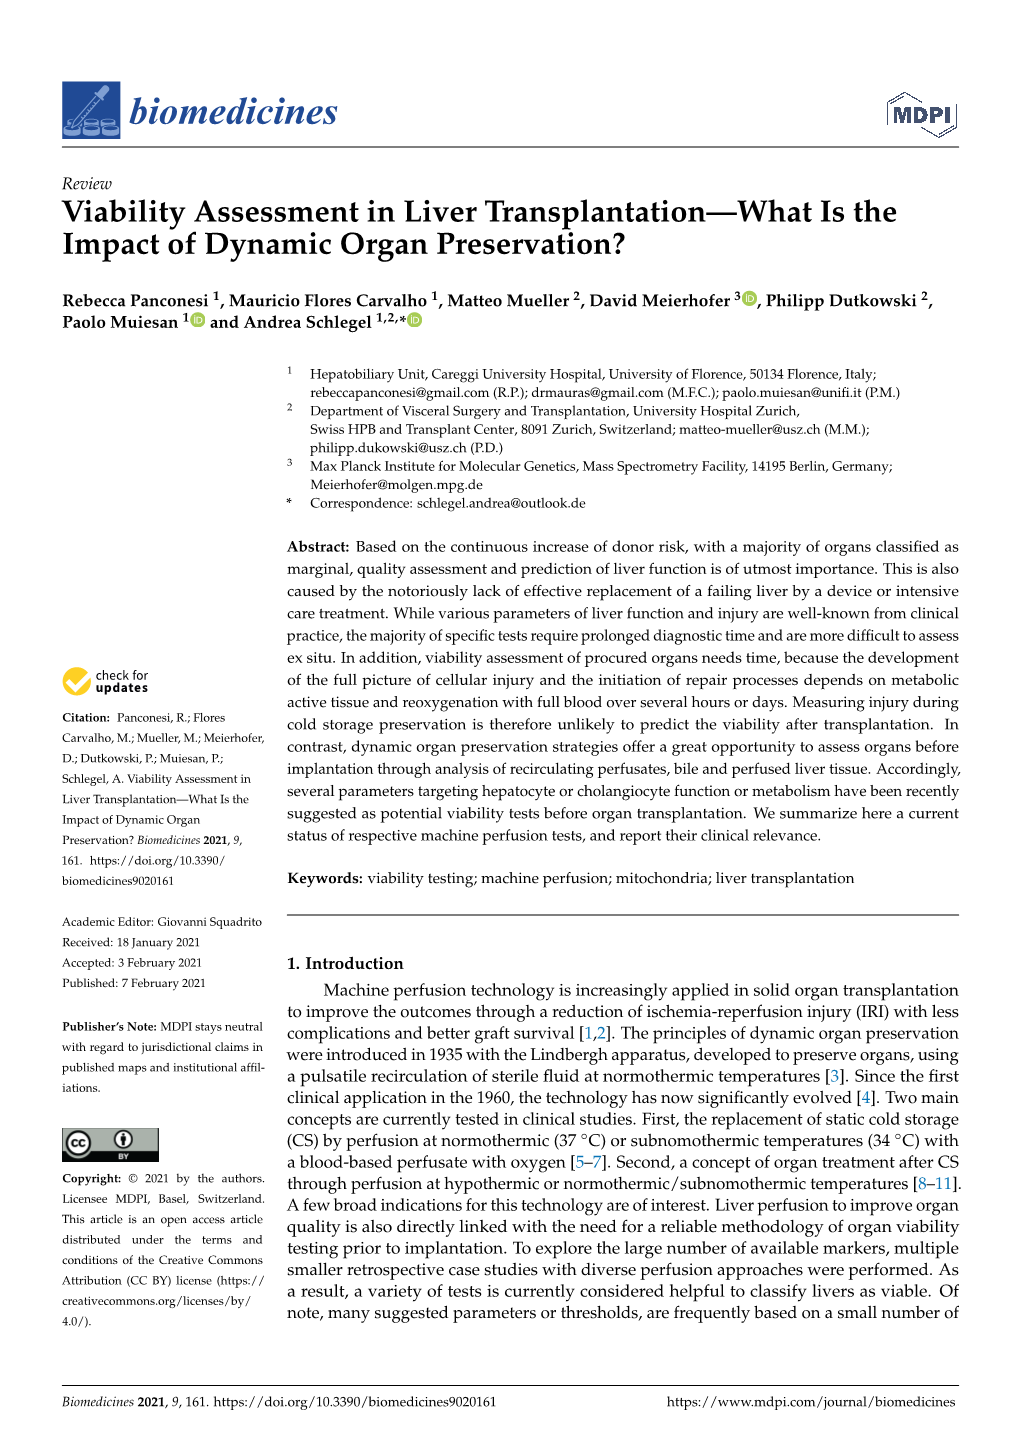 Viability Assessment in Liver Transplantation—What Is the Impact of Dynamic Organ Preservation?